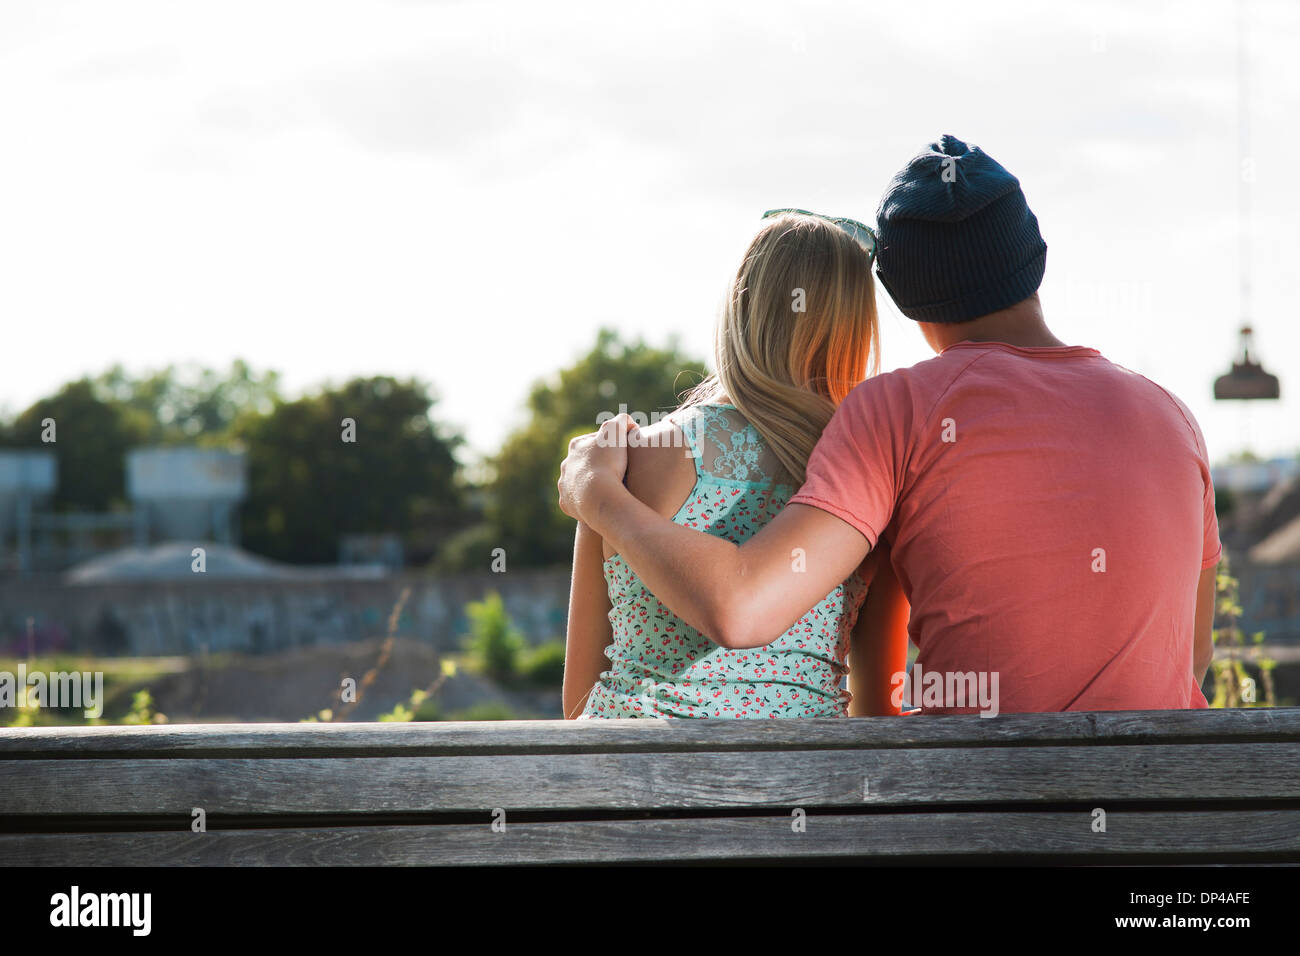 Backview of teenage boy with arm around teenage girl, sitting on bench outdoors, Germany Stock Photo